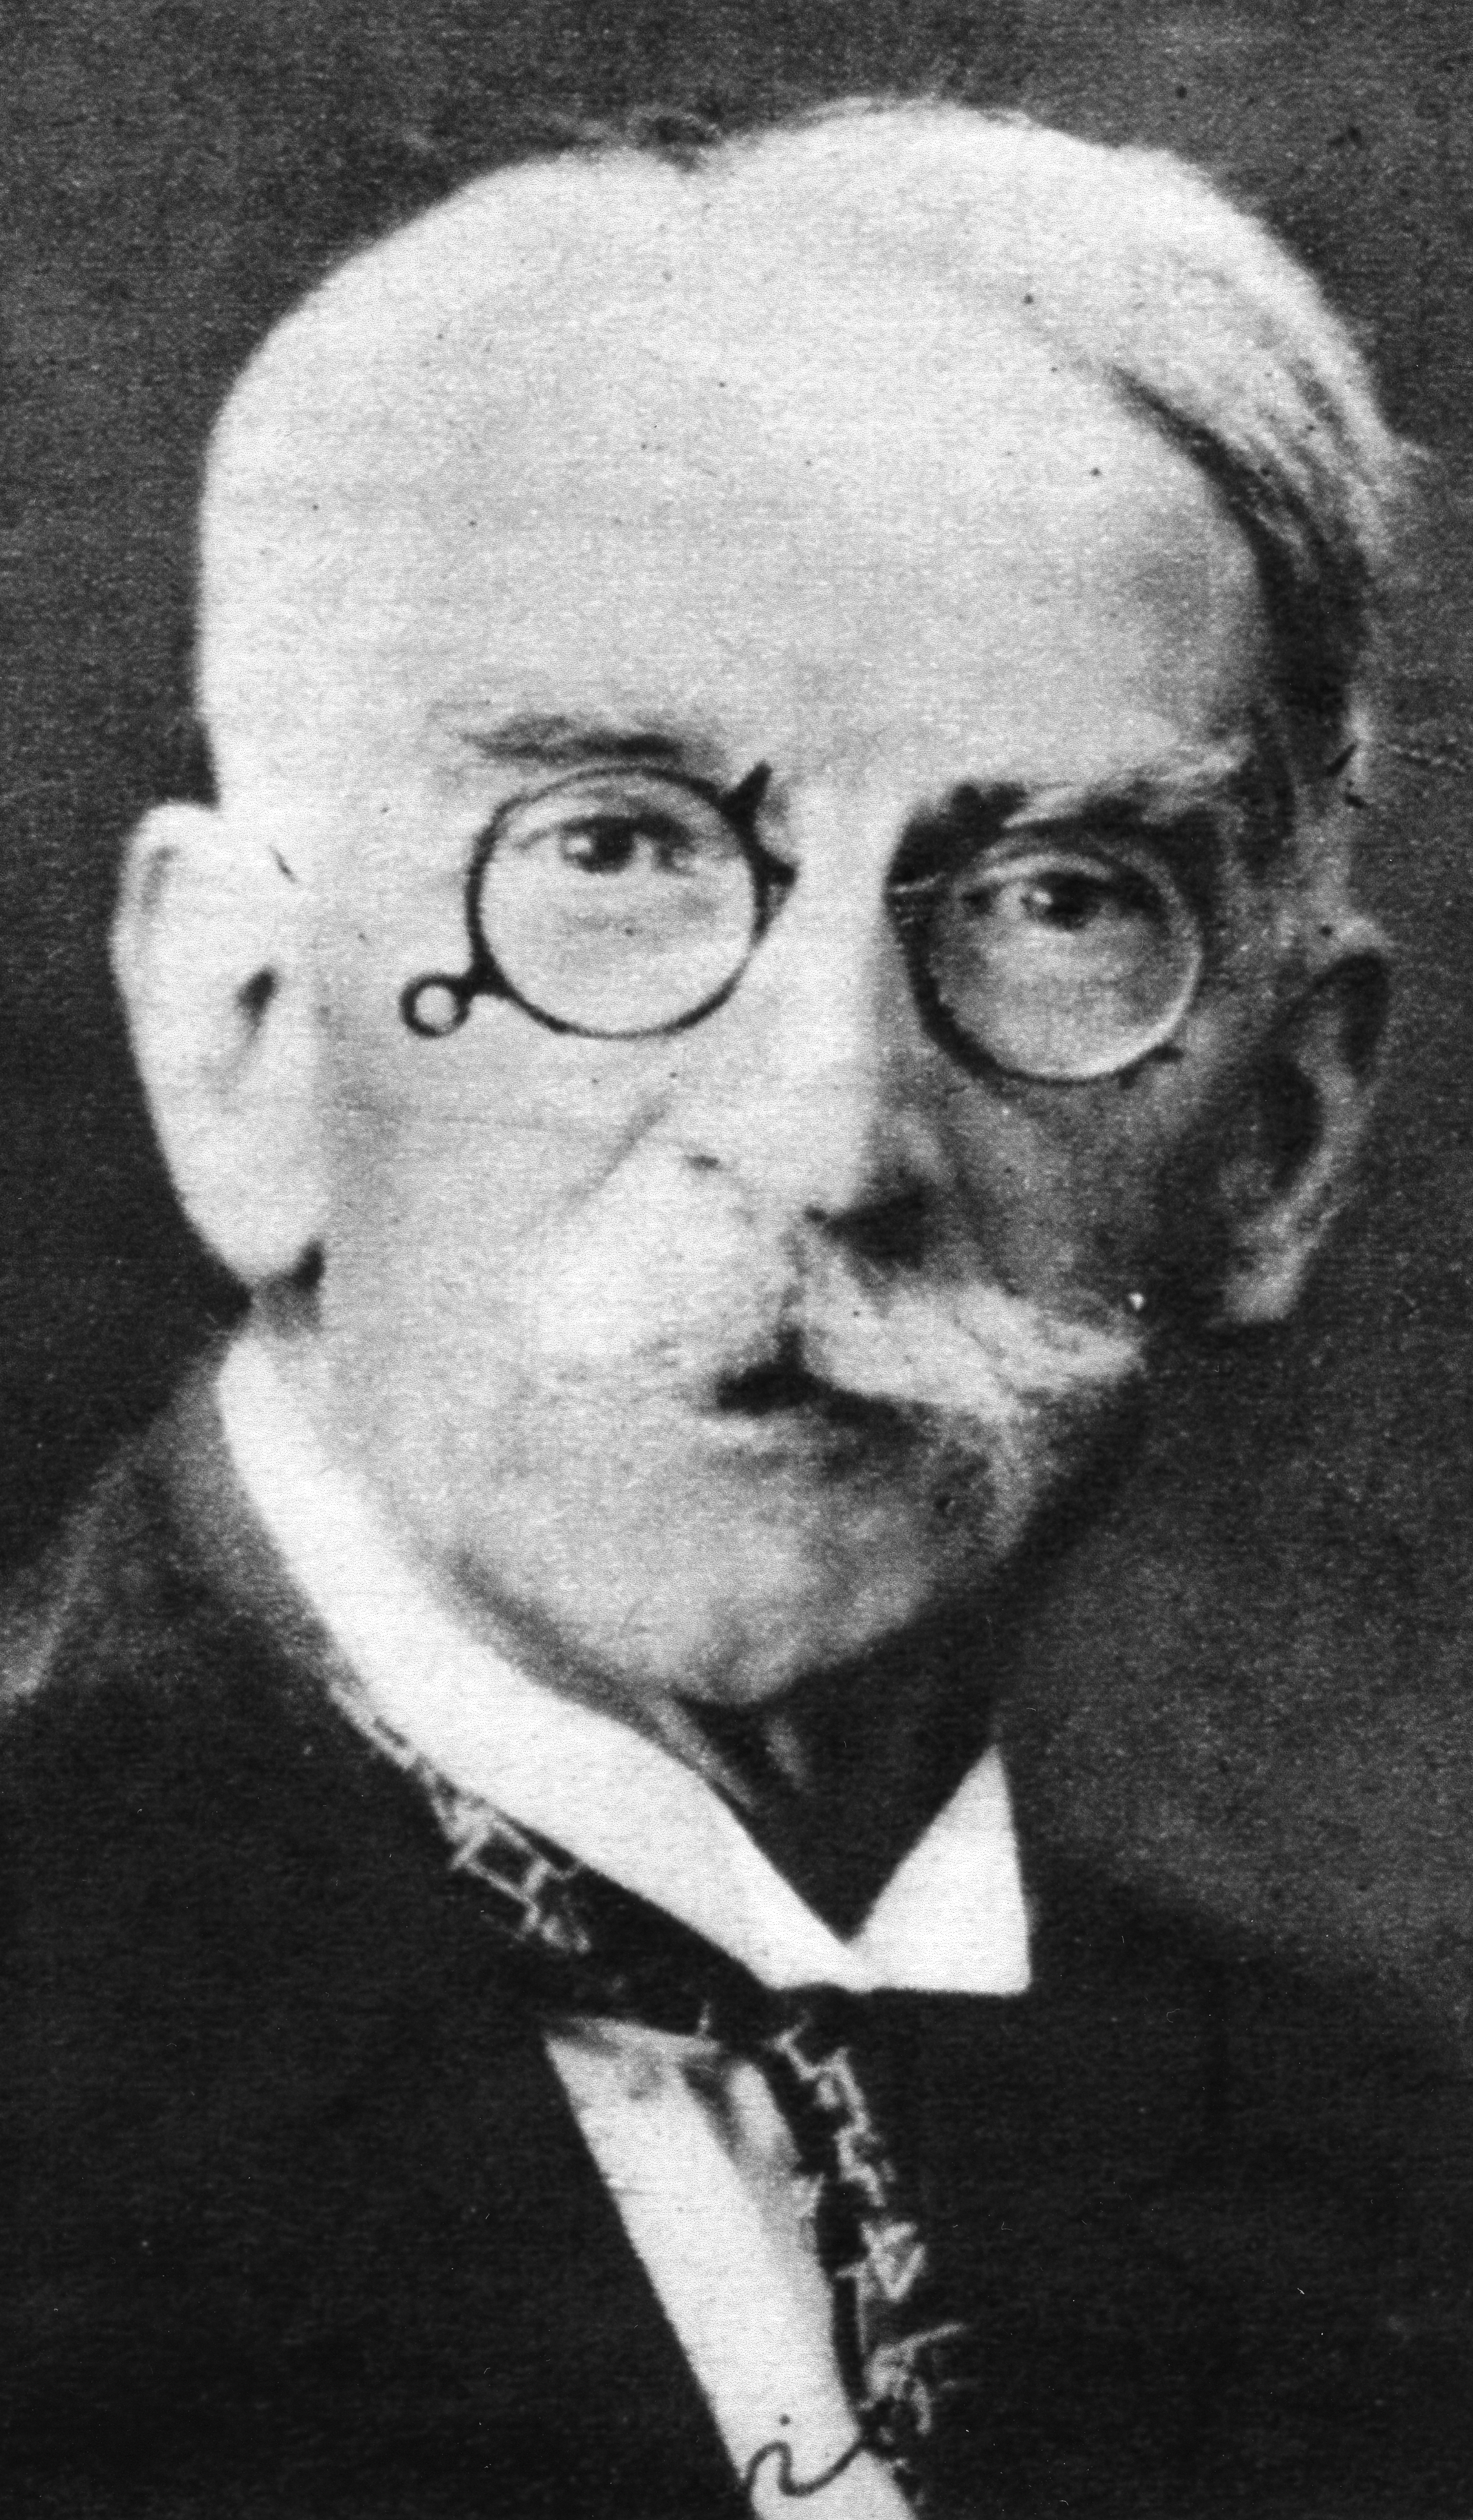 Portrait of an older man with round spectacles wearing an old fashioned suit and tie. He has neat white hair and a bushy white mustache. 